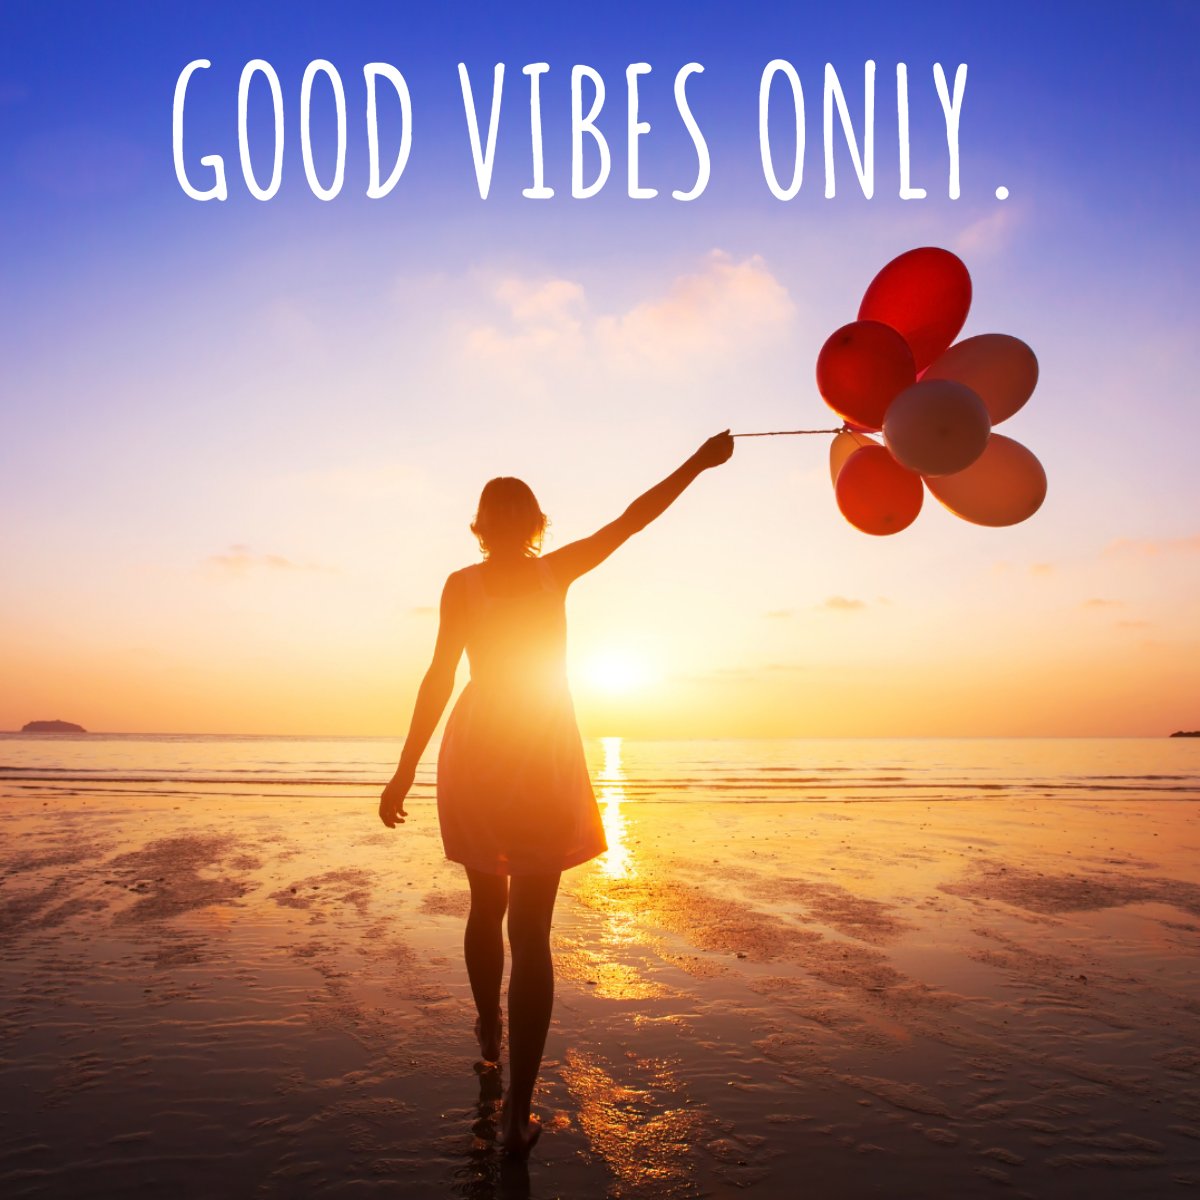 Good Vibes Only...🙆✌️

#goodvibesonly✌️  #vibes  #goodvibes  #positivevibes  #goodquote  #goodenergyonly  #instagood
#callniecie